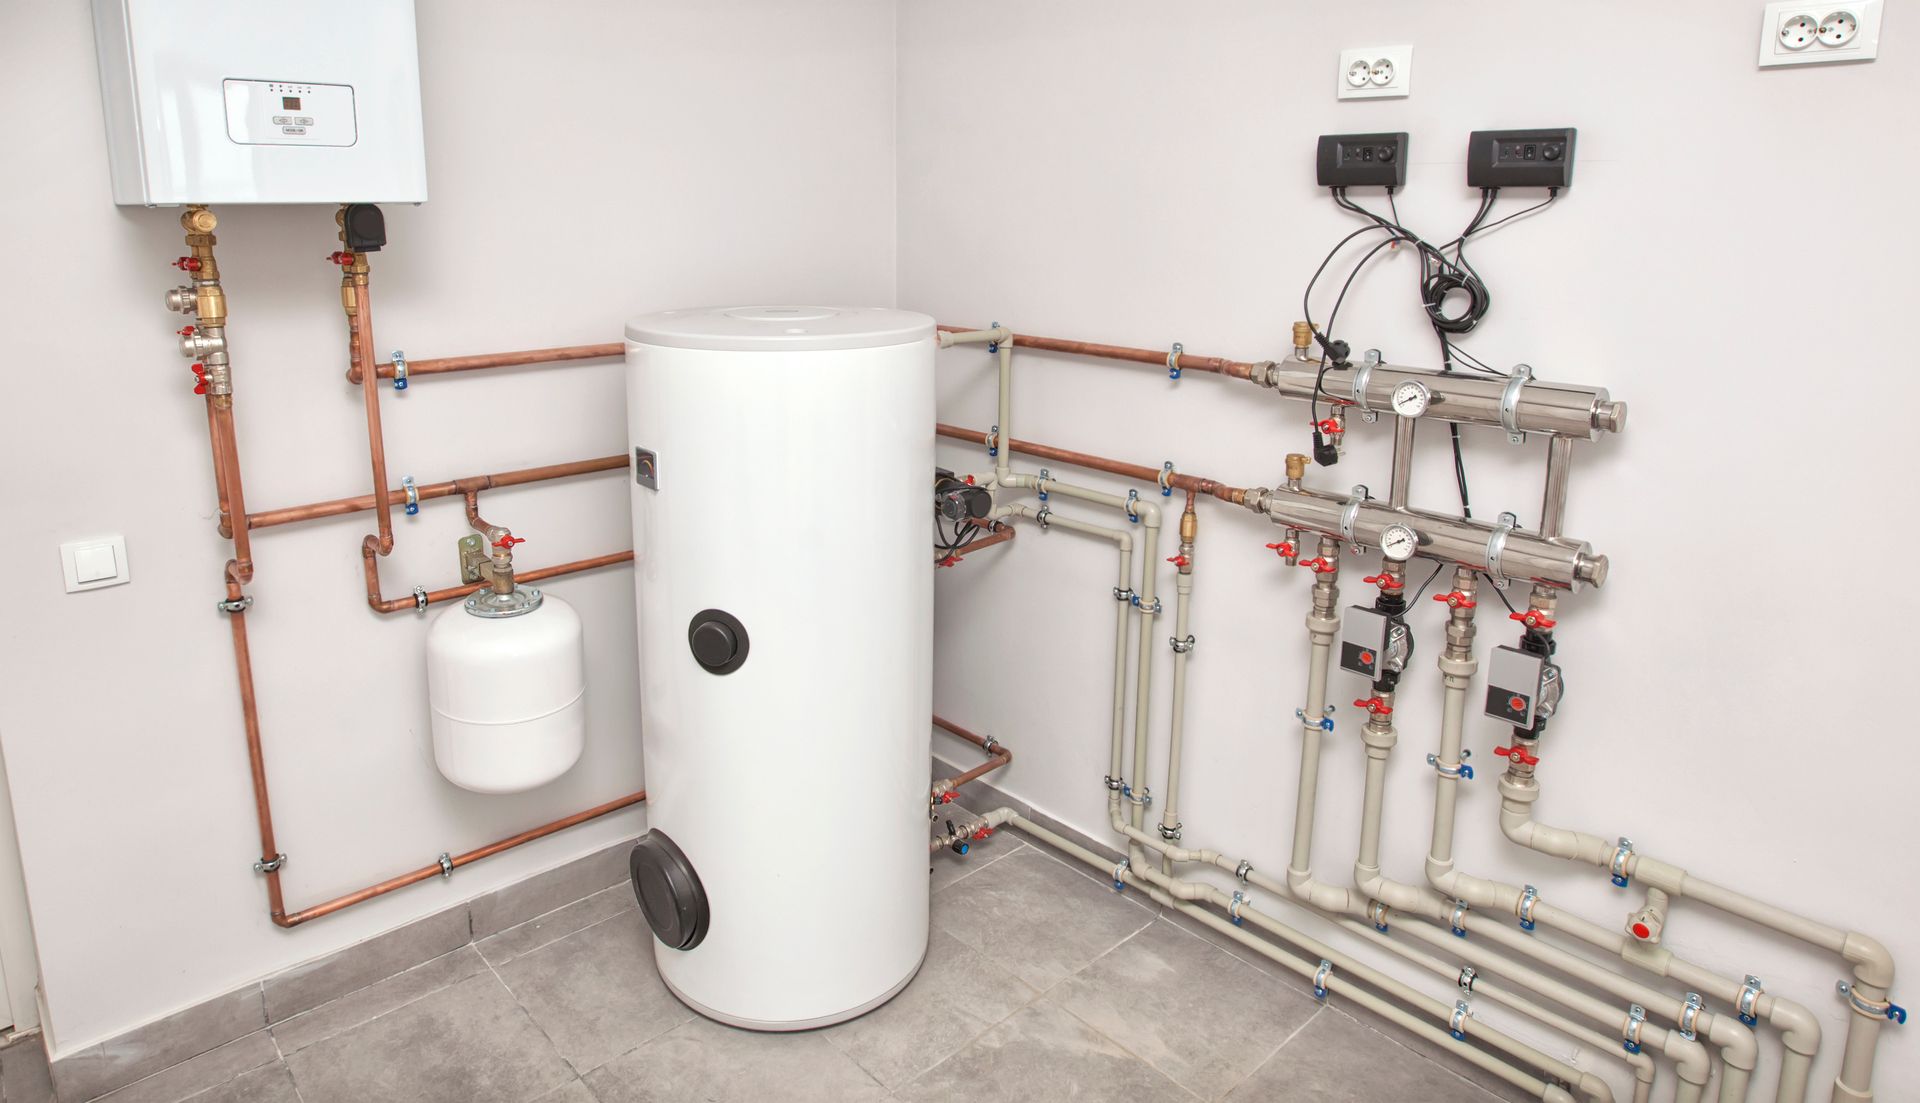 A cluttered boiler room with various equipment, including a boiler, heater, pipes, expansion tank, and more.